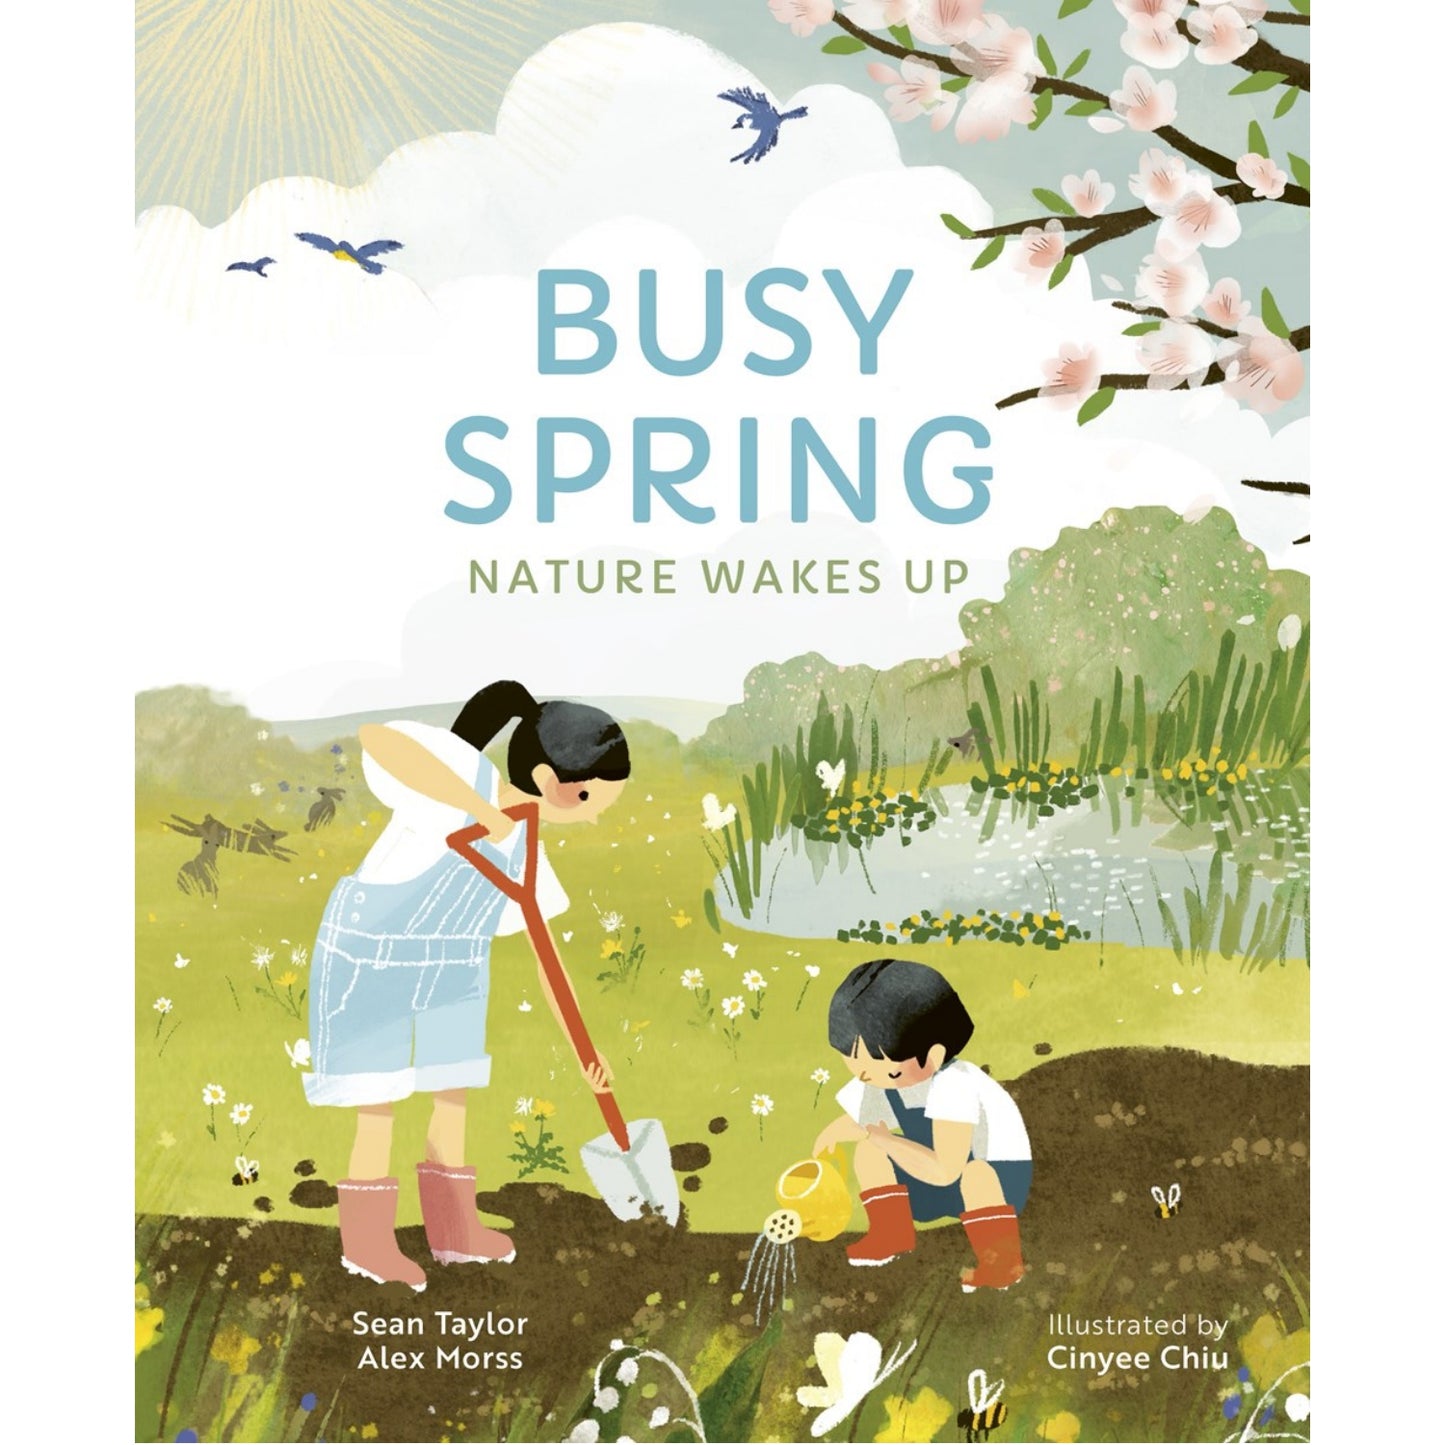 Busy Spring: Nature Wakes Up | Hardcover | Children’s Book on Nature